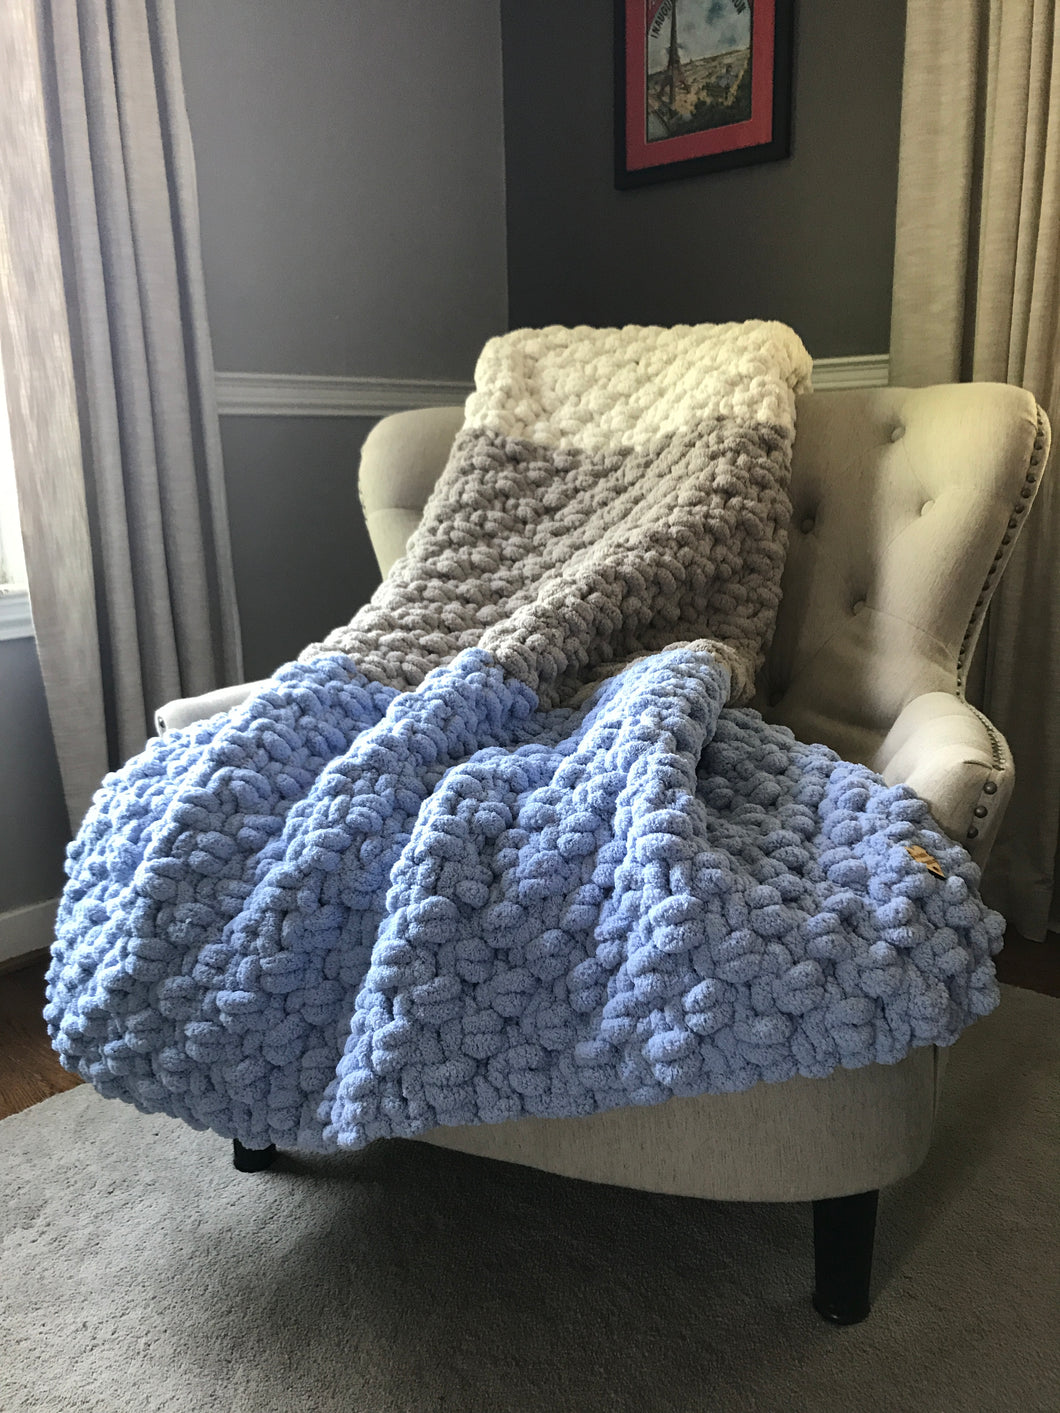 Periwinkle Striped Blanket - Blue Gray and Ivory Blanket